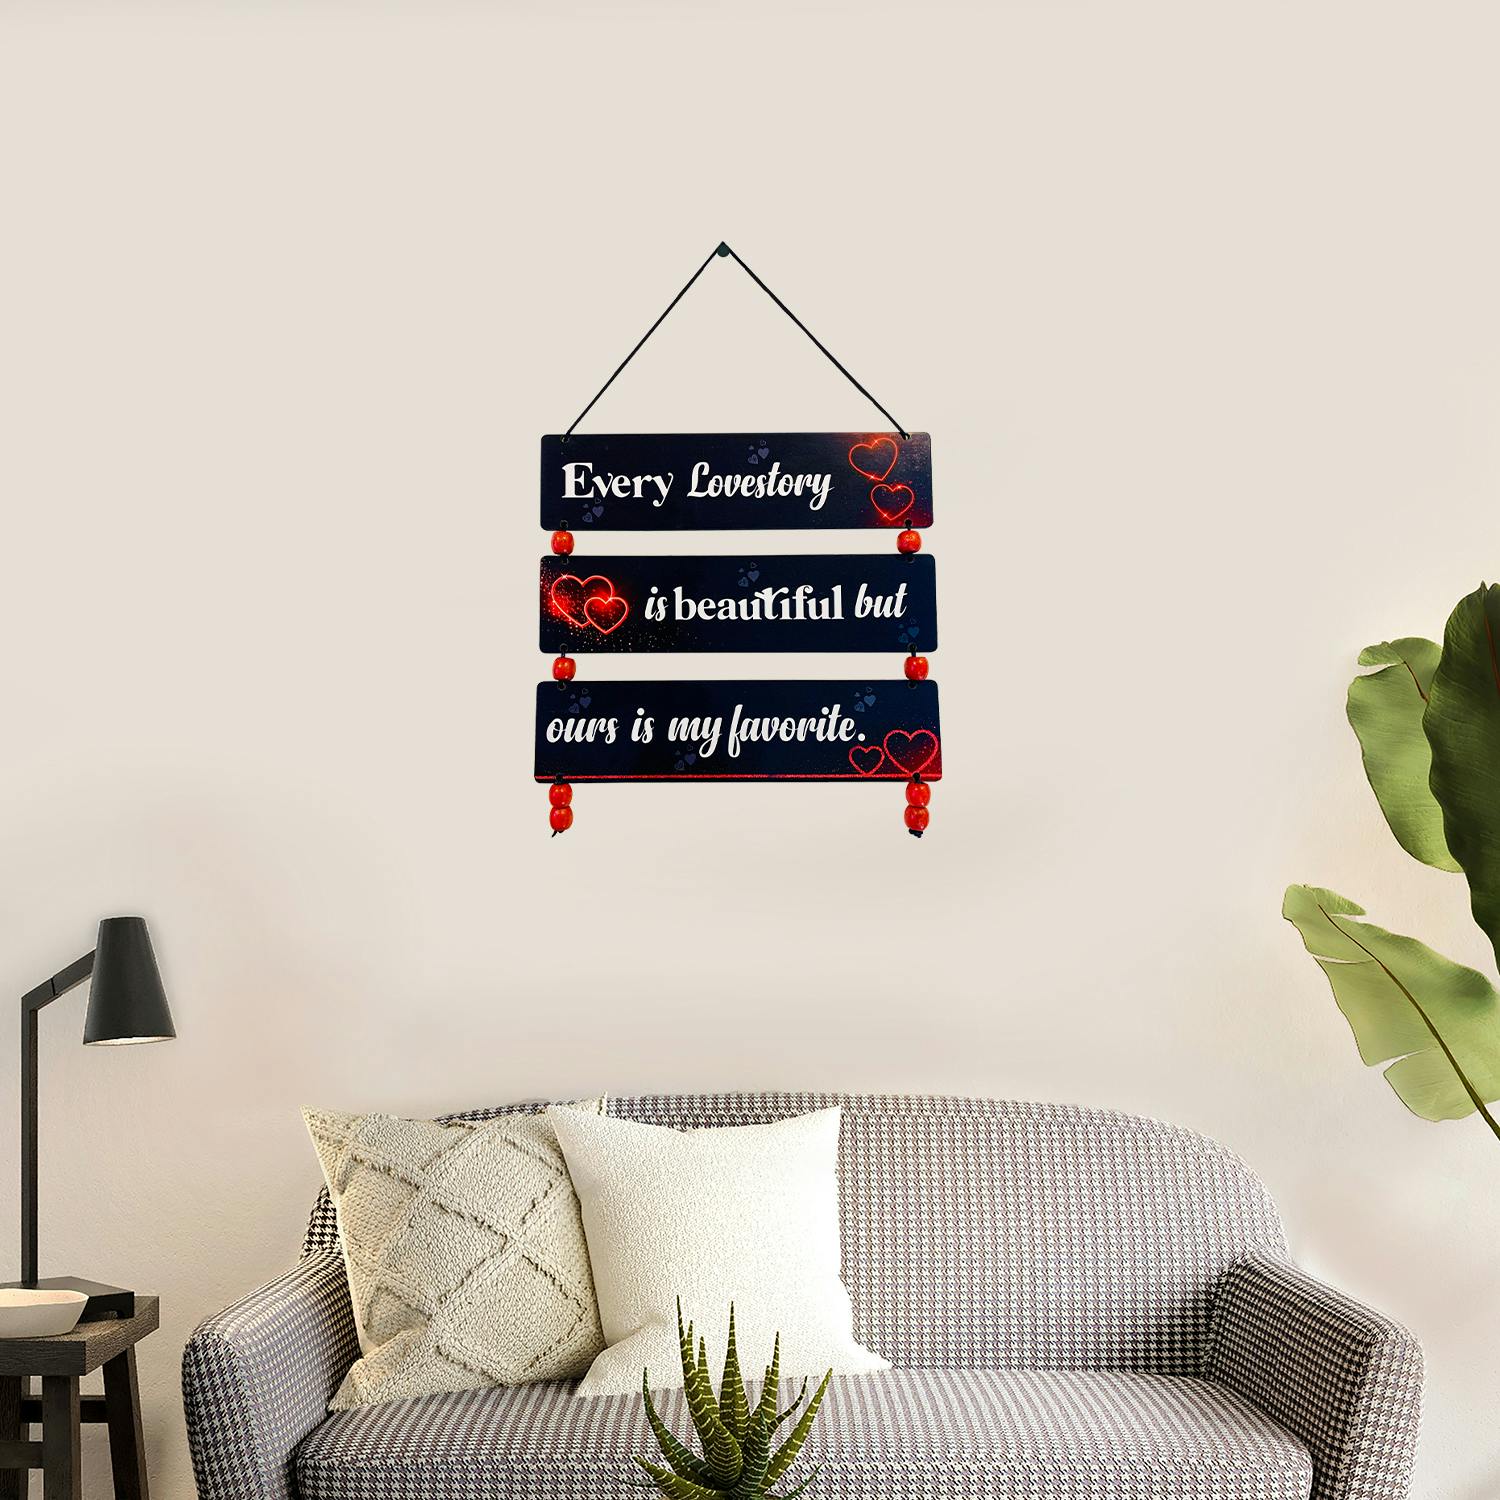 Every LoveStory is Beautiful but our is favorite wall hanging